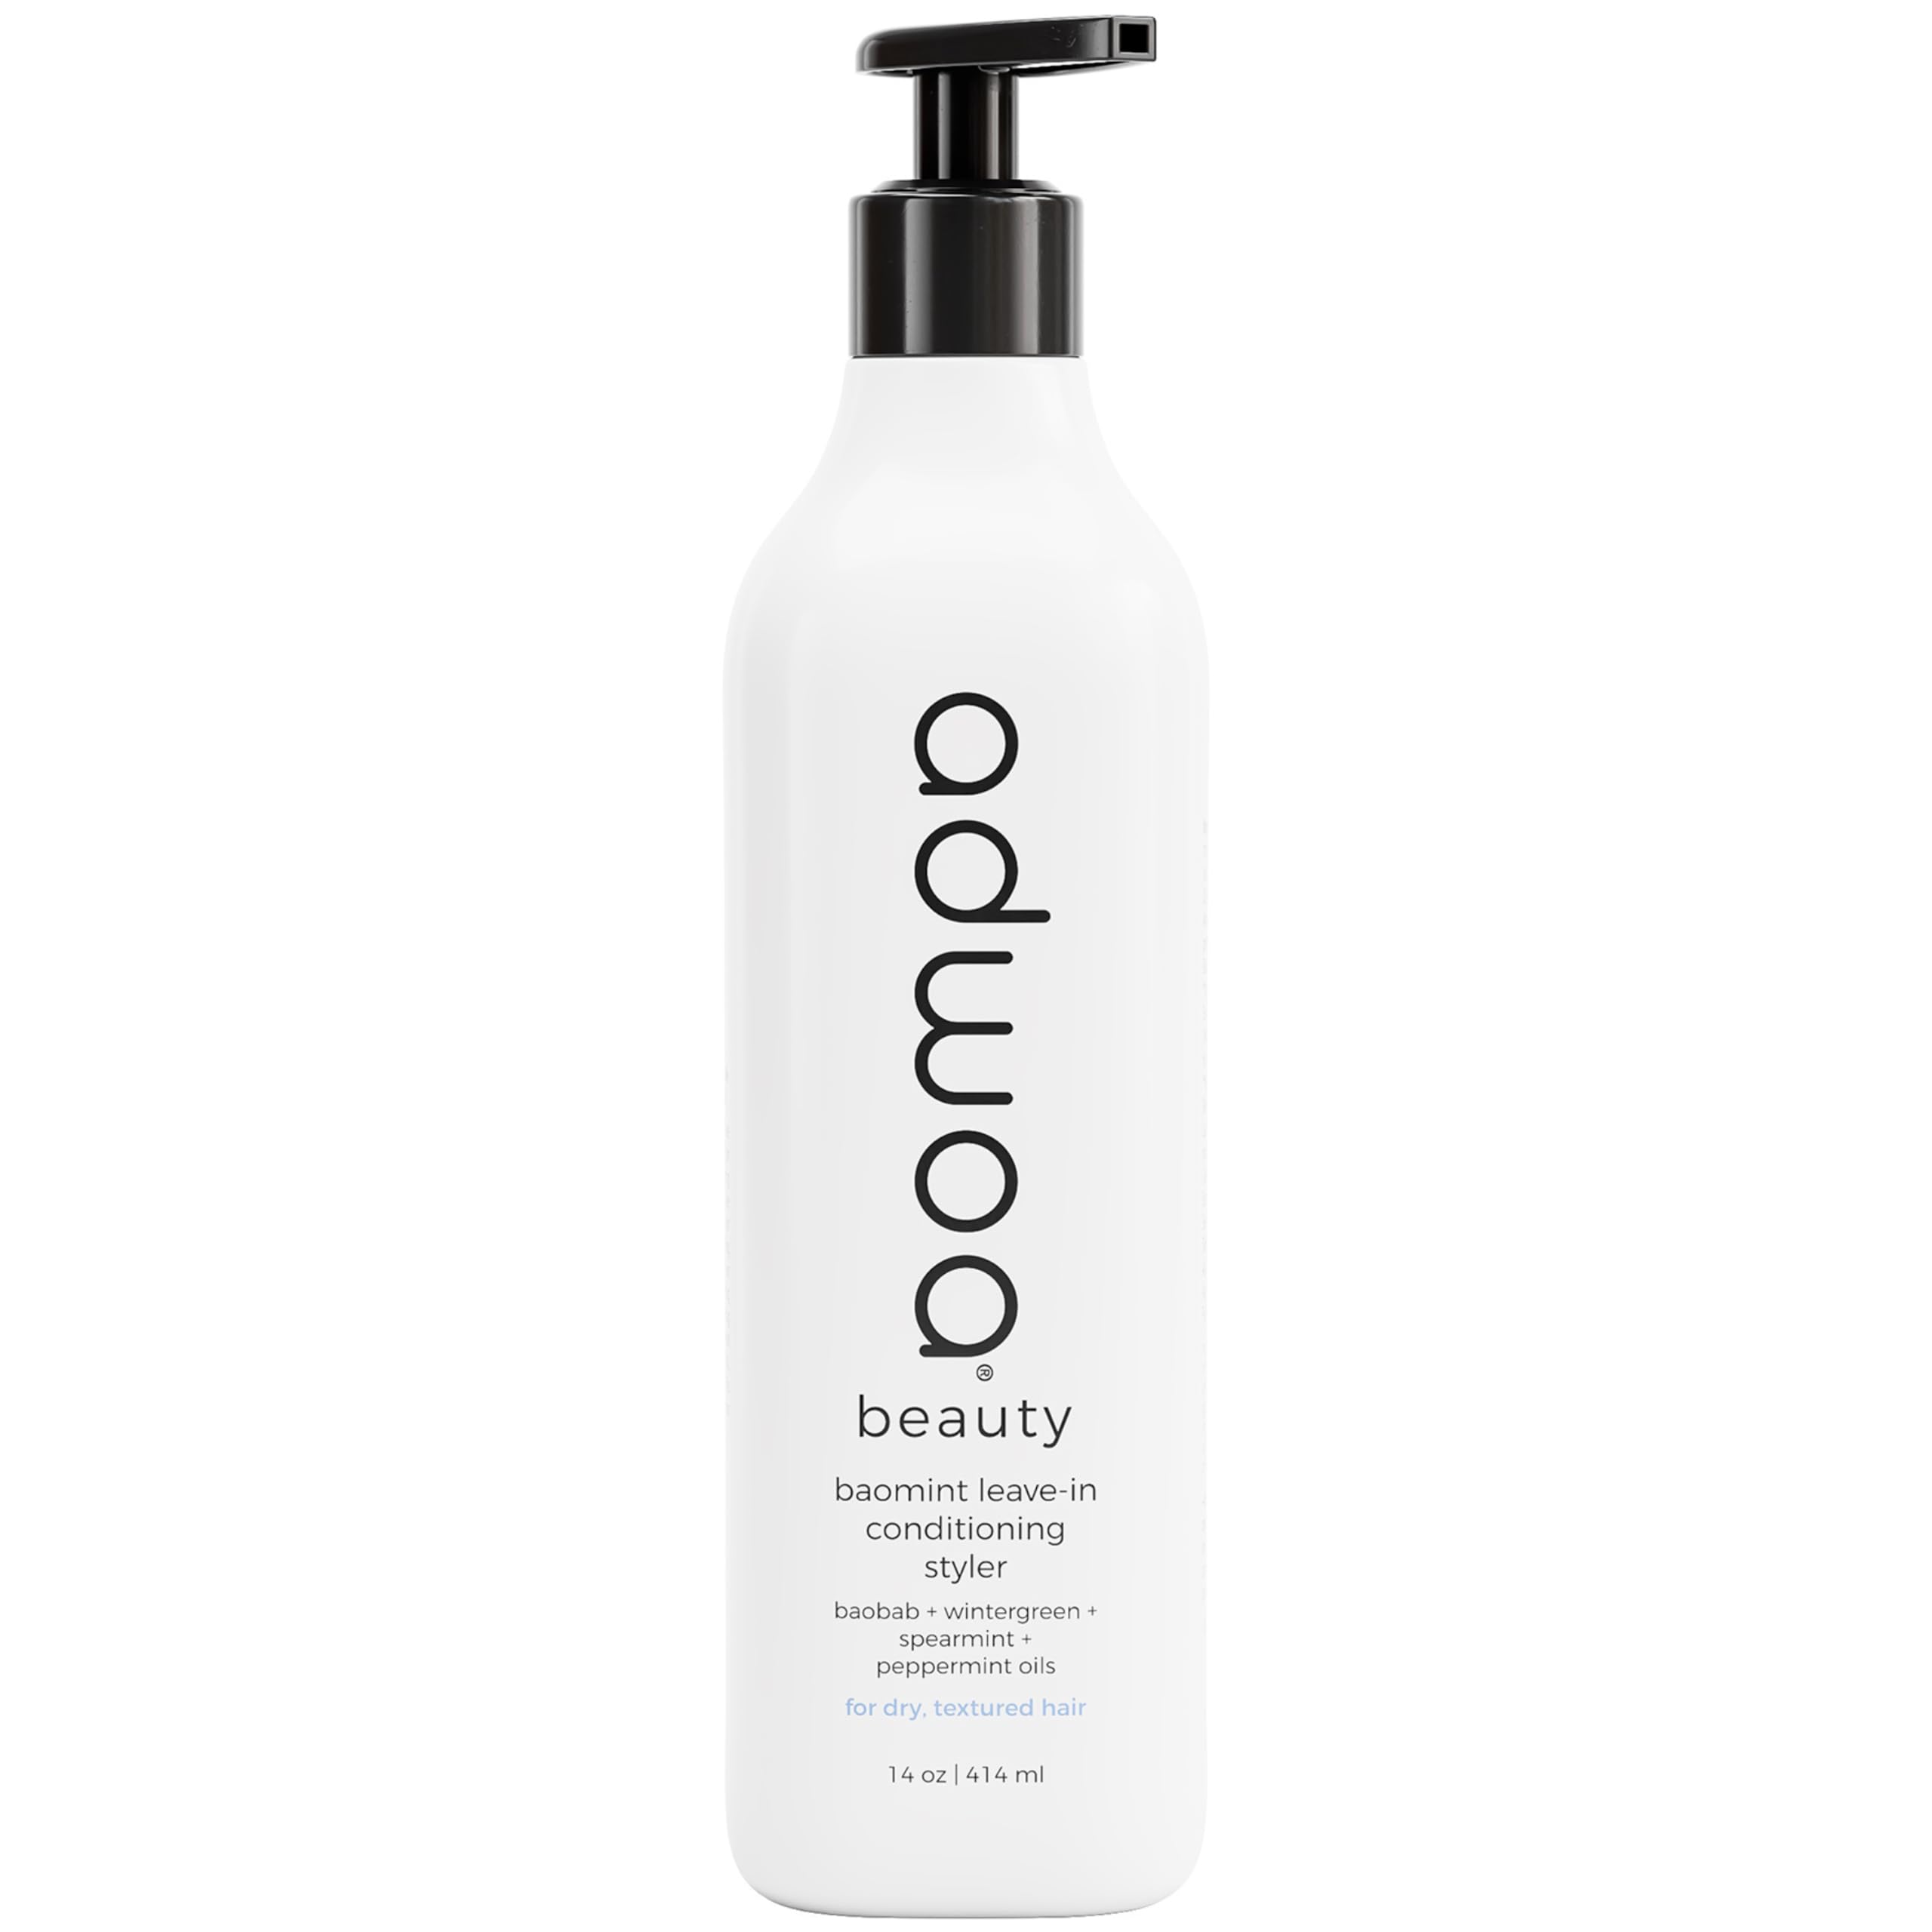 adwoa beauty Baomint™ Leave In Conditioning Styler 14 oz/ 414 mL